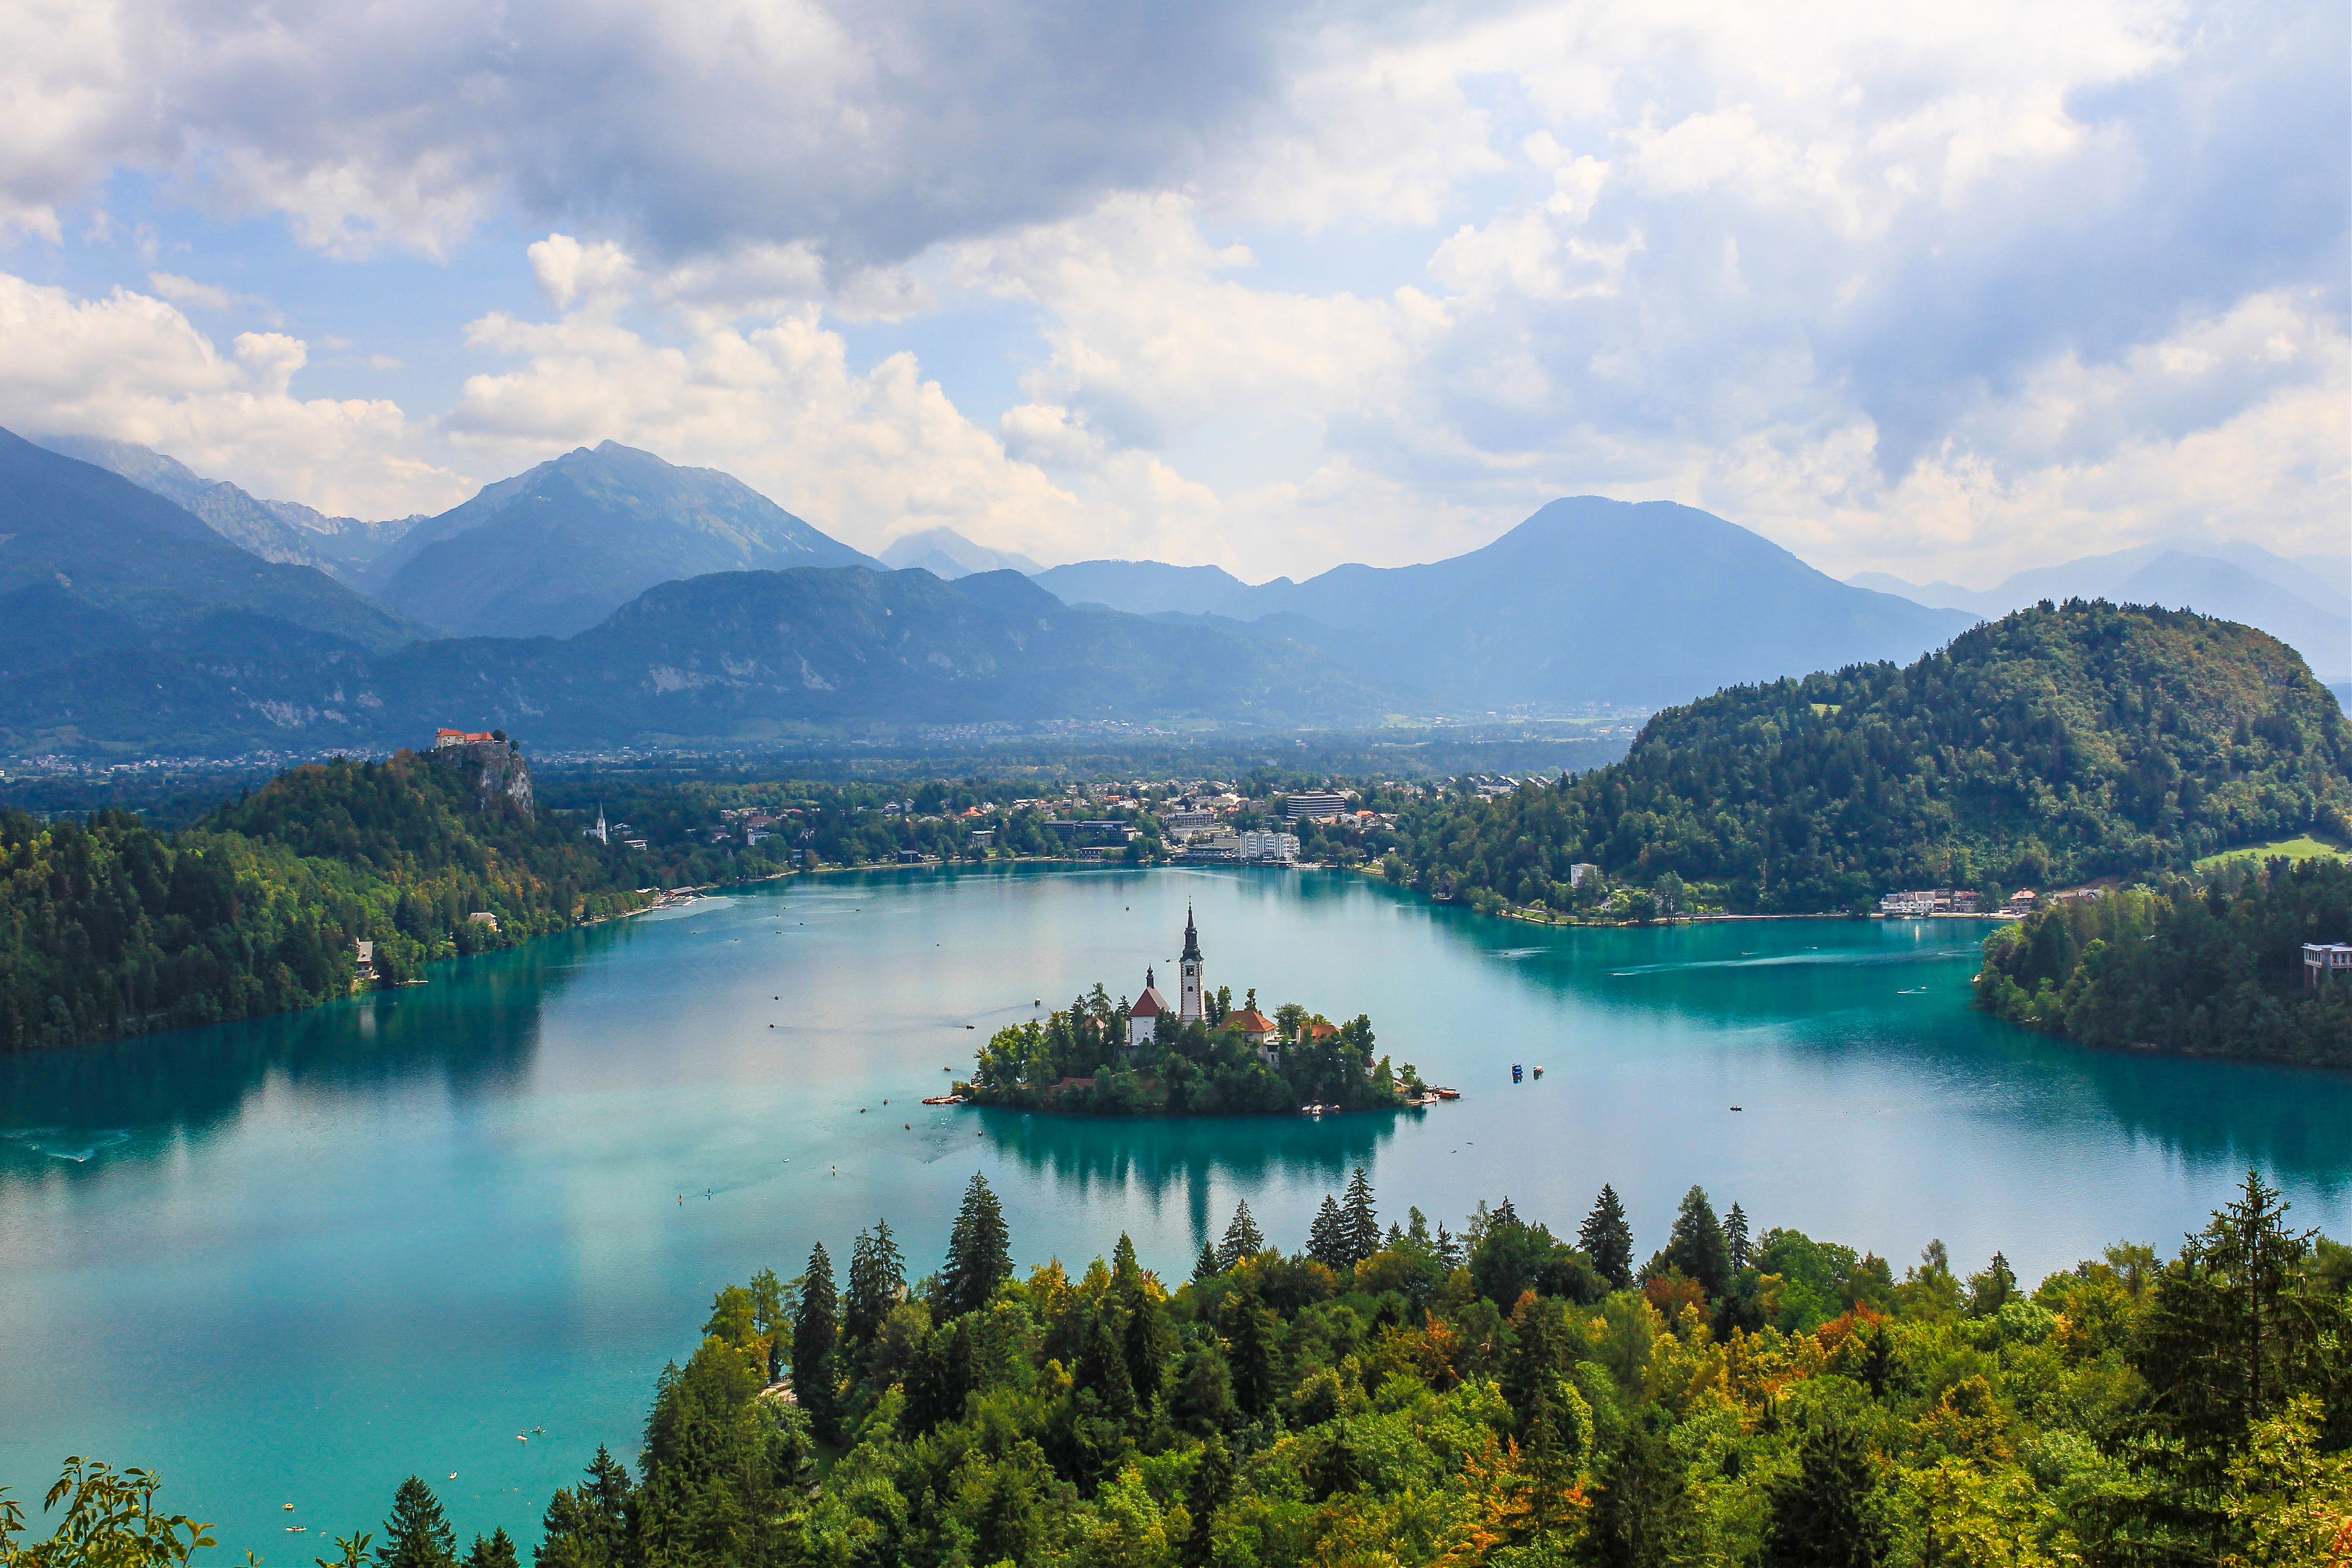 12 Images that will make you want to visit Slovenia